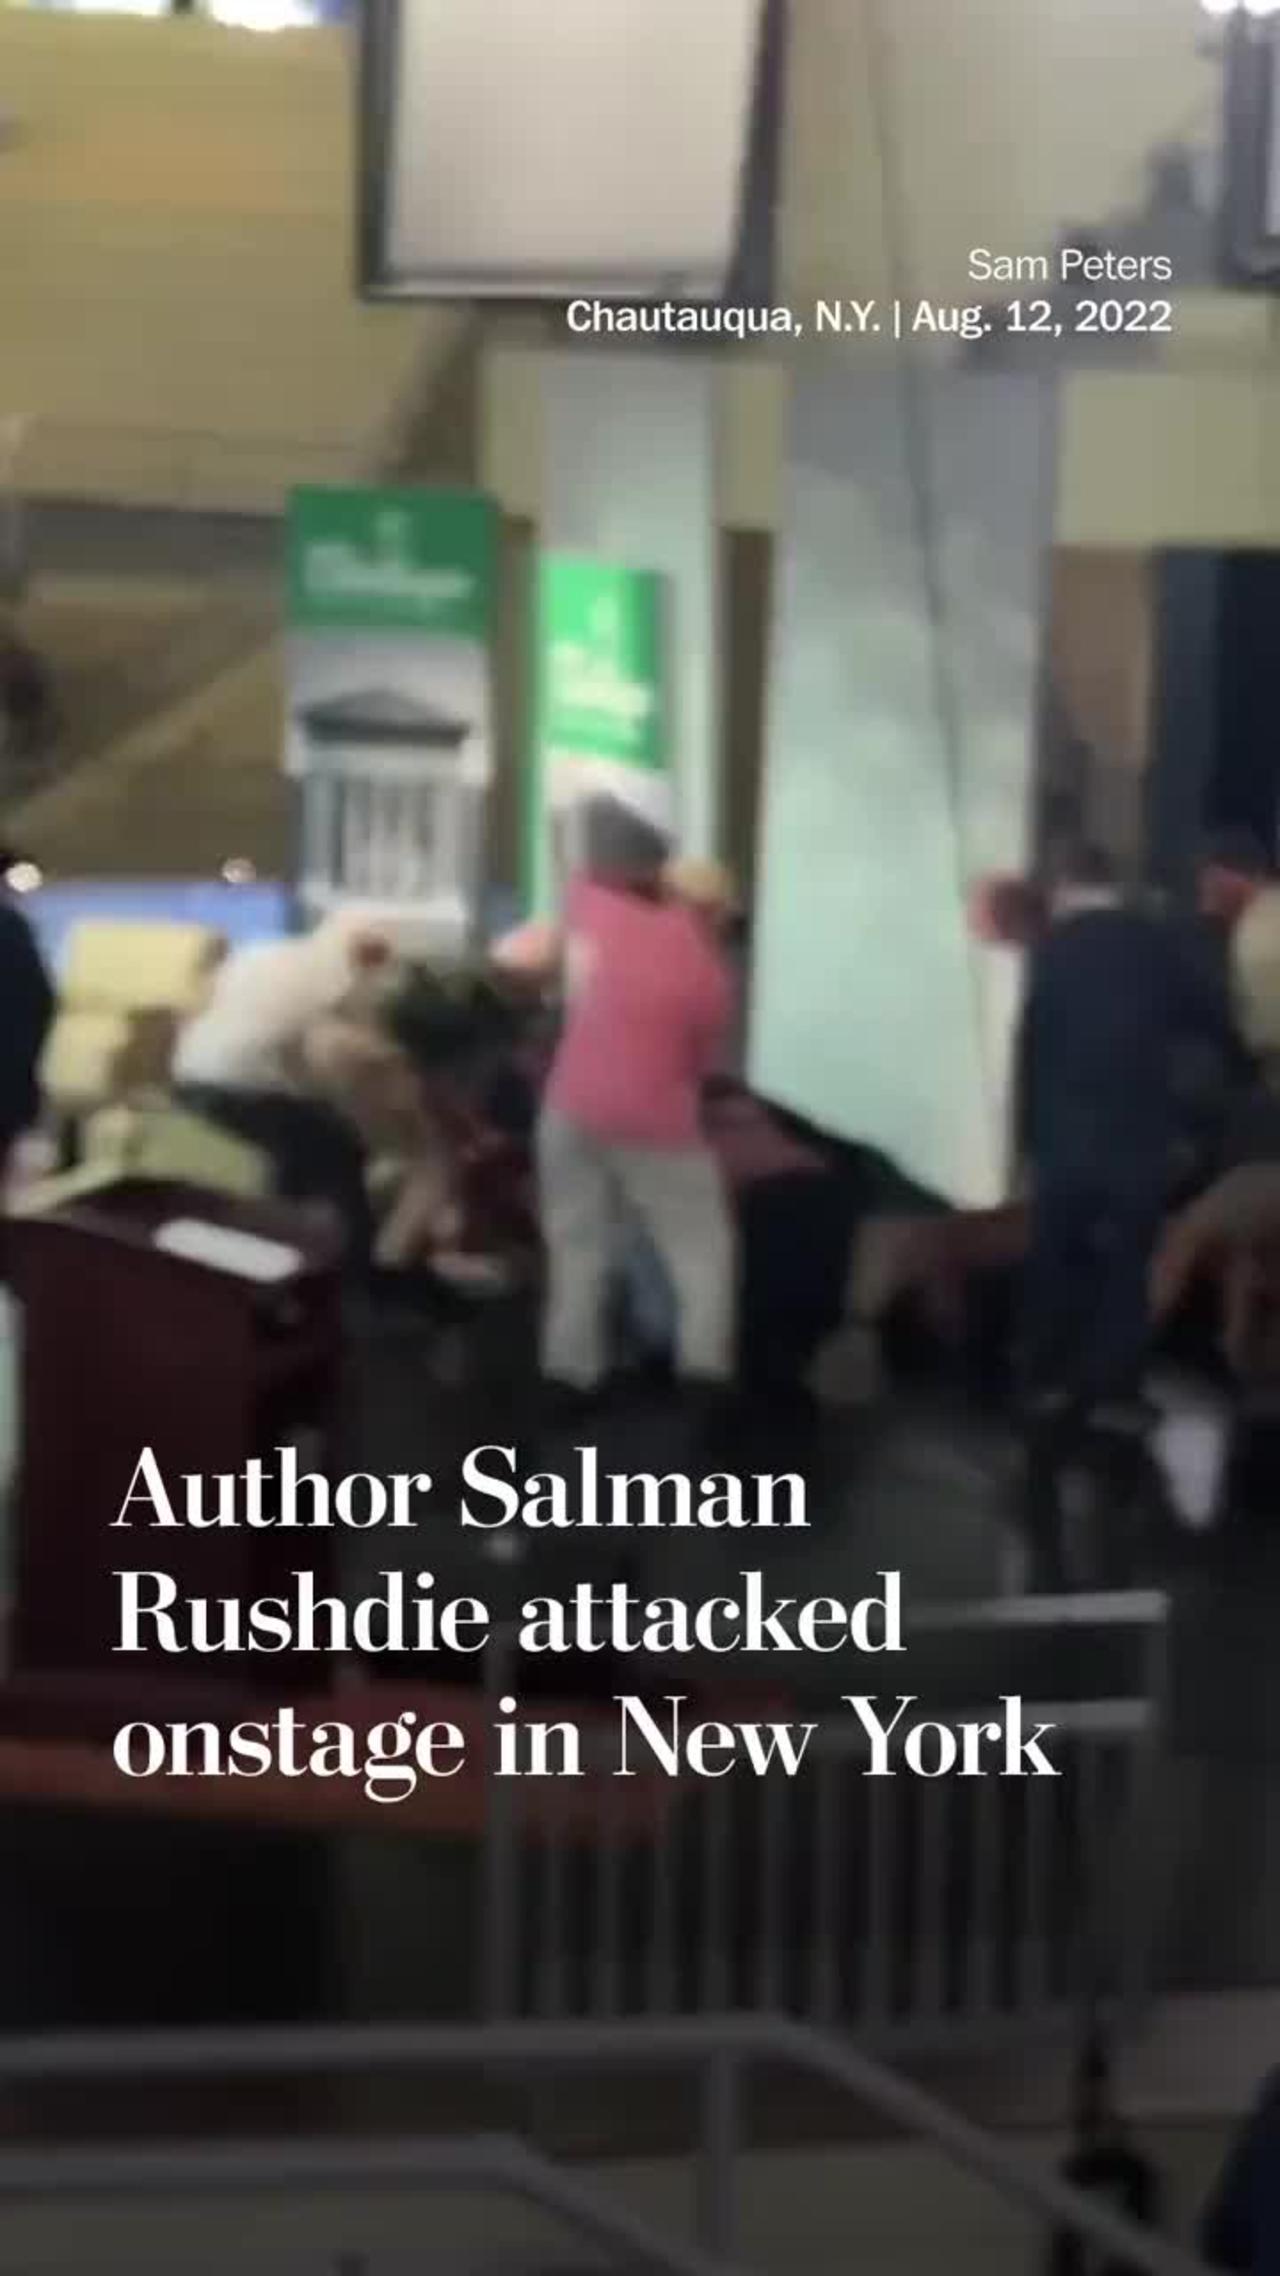 Author Salman Rushdie has been injured in an apparent stabbing attempt